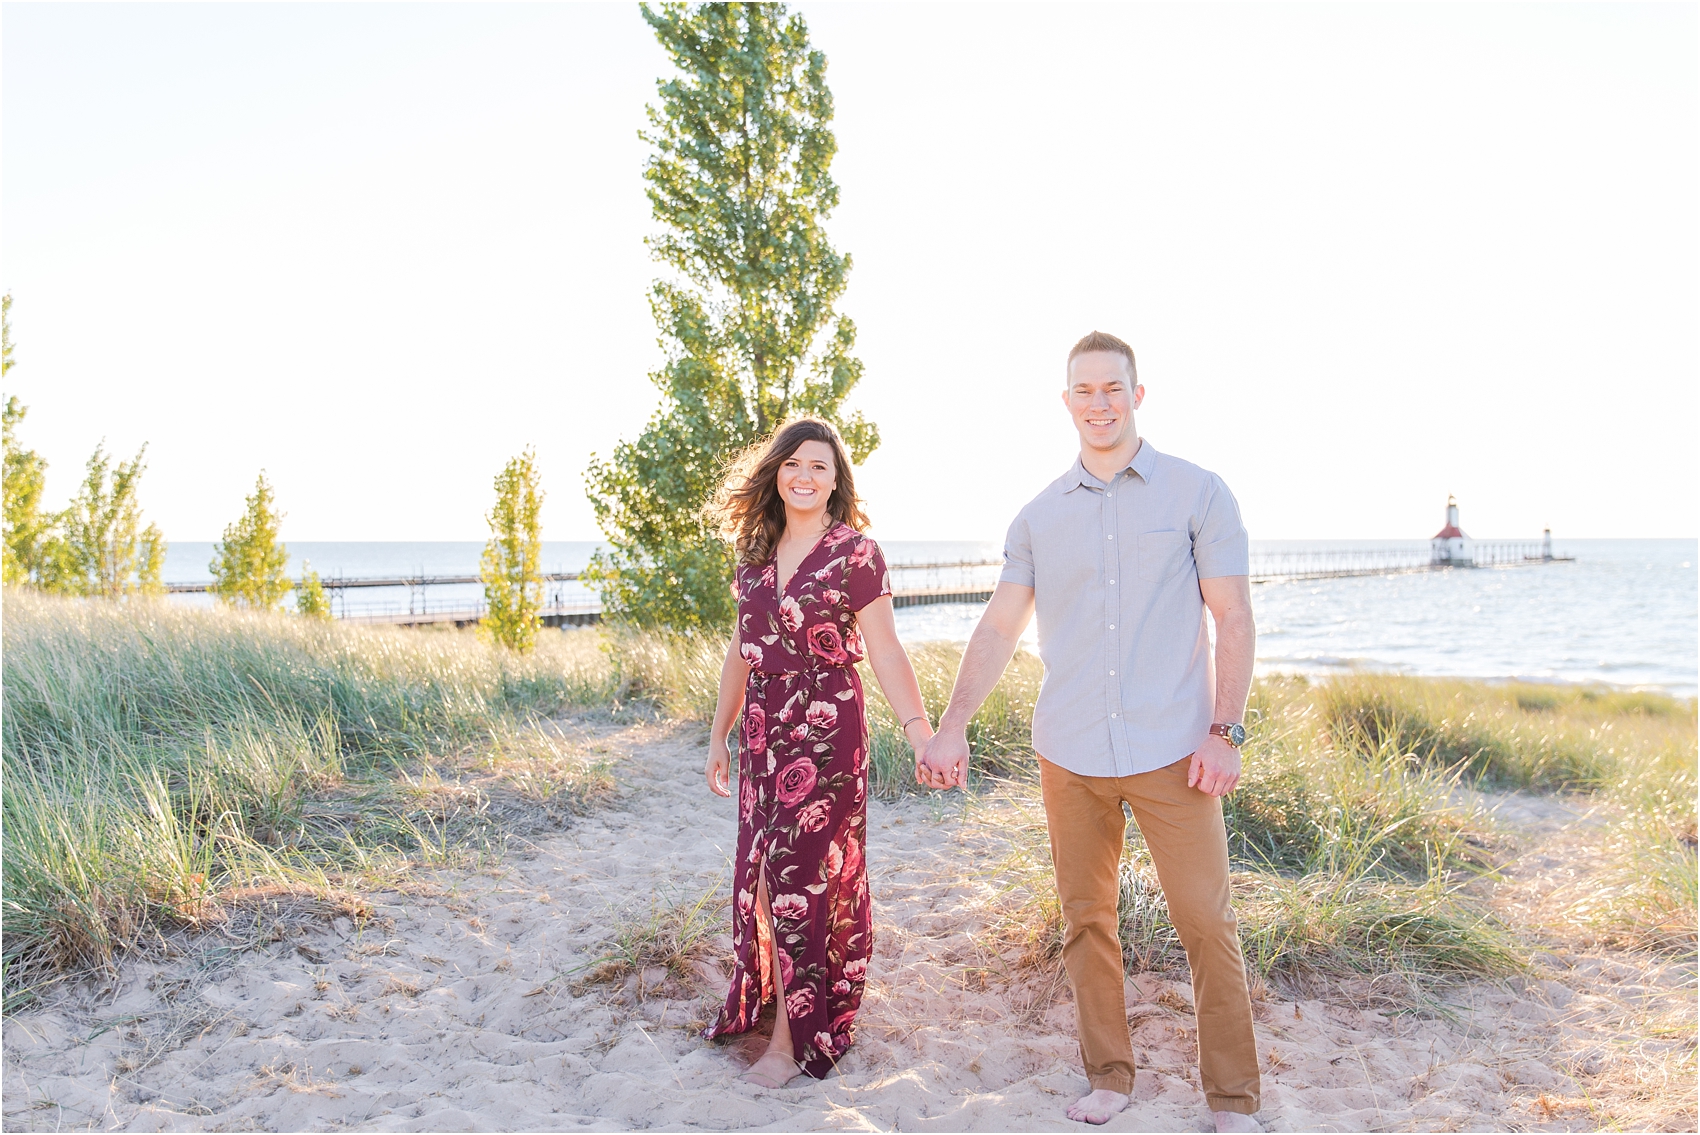 candid-end-of-summer-sunset-engagement-photos-at-silver-beach-in-st-joseph-mi-by-courtney-carolyn-photography_0012.jpg